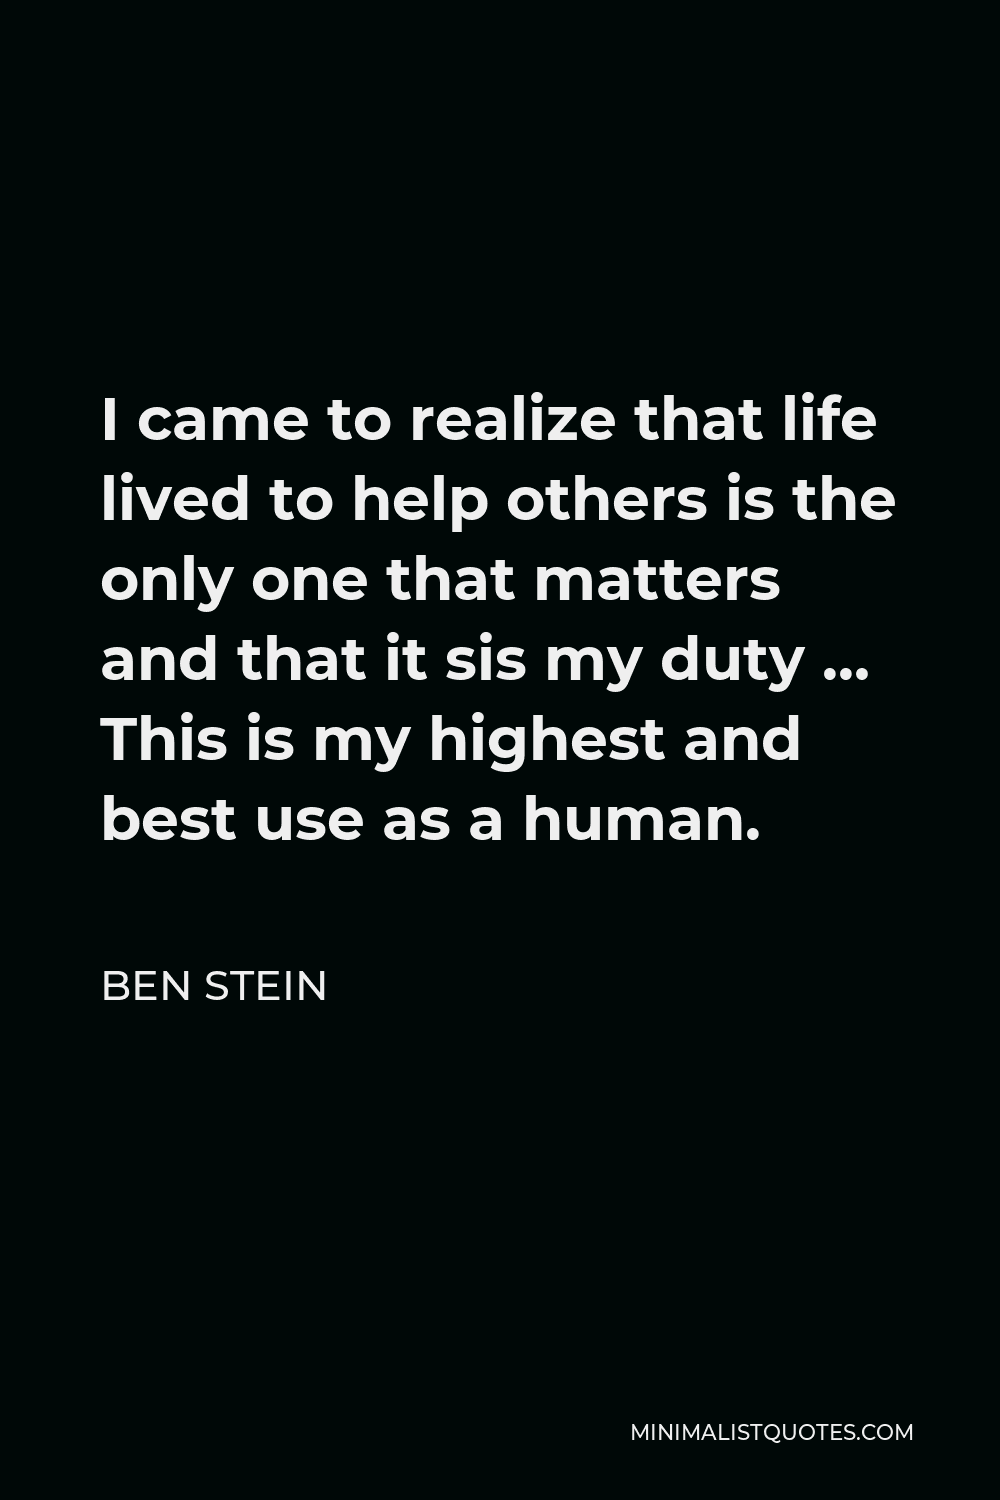 Ben Stein Quote - I came to realize that life lived to help others is the only one that matters and that it sis my duty … This is my highest and best use as a human.